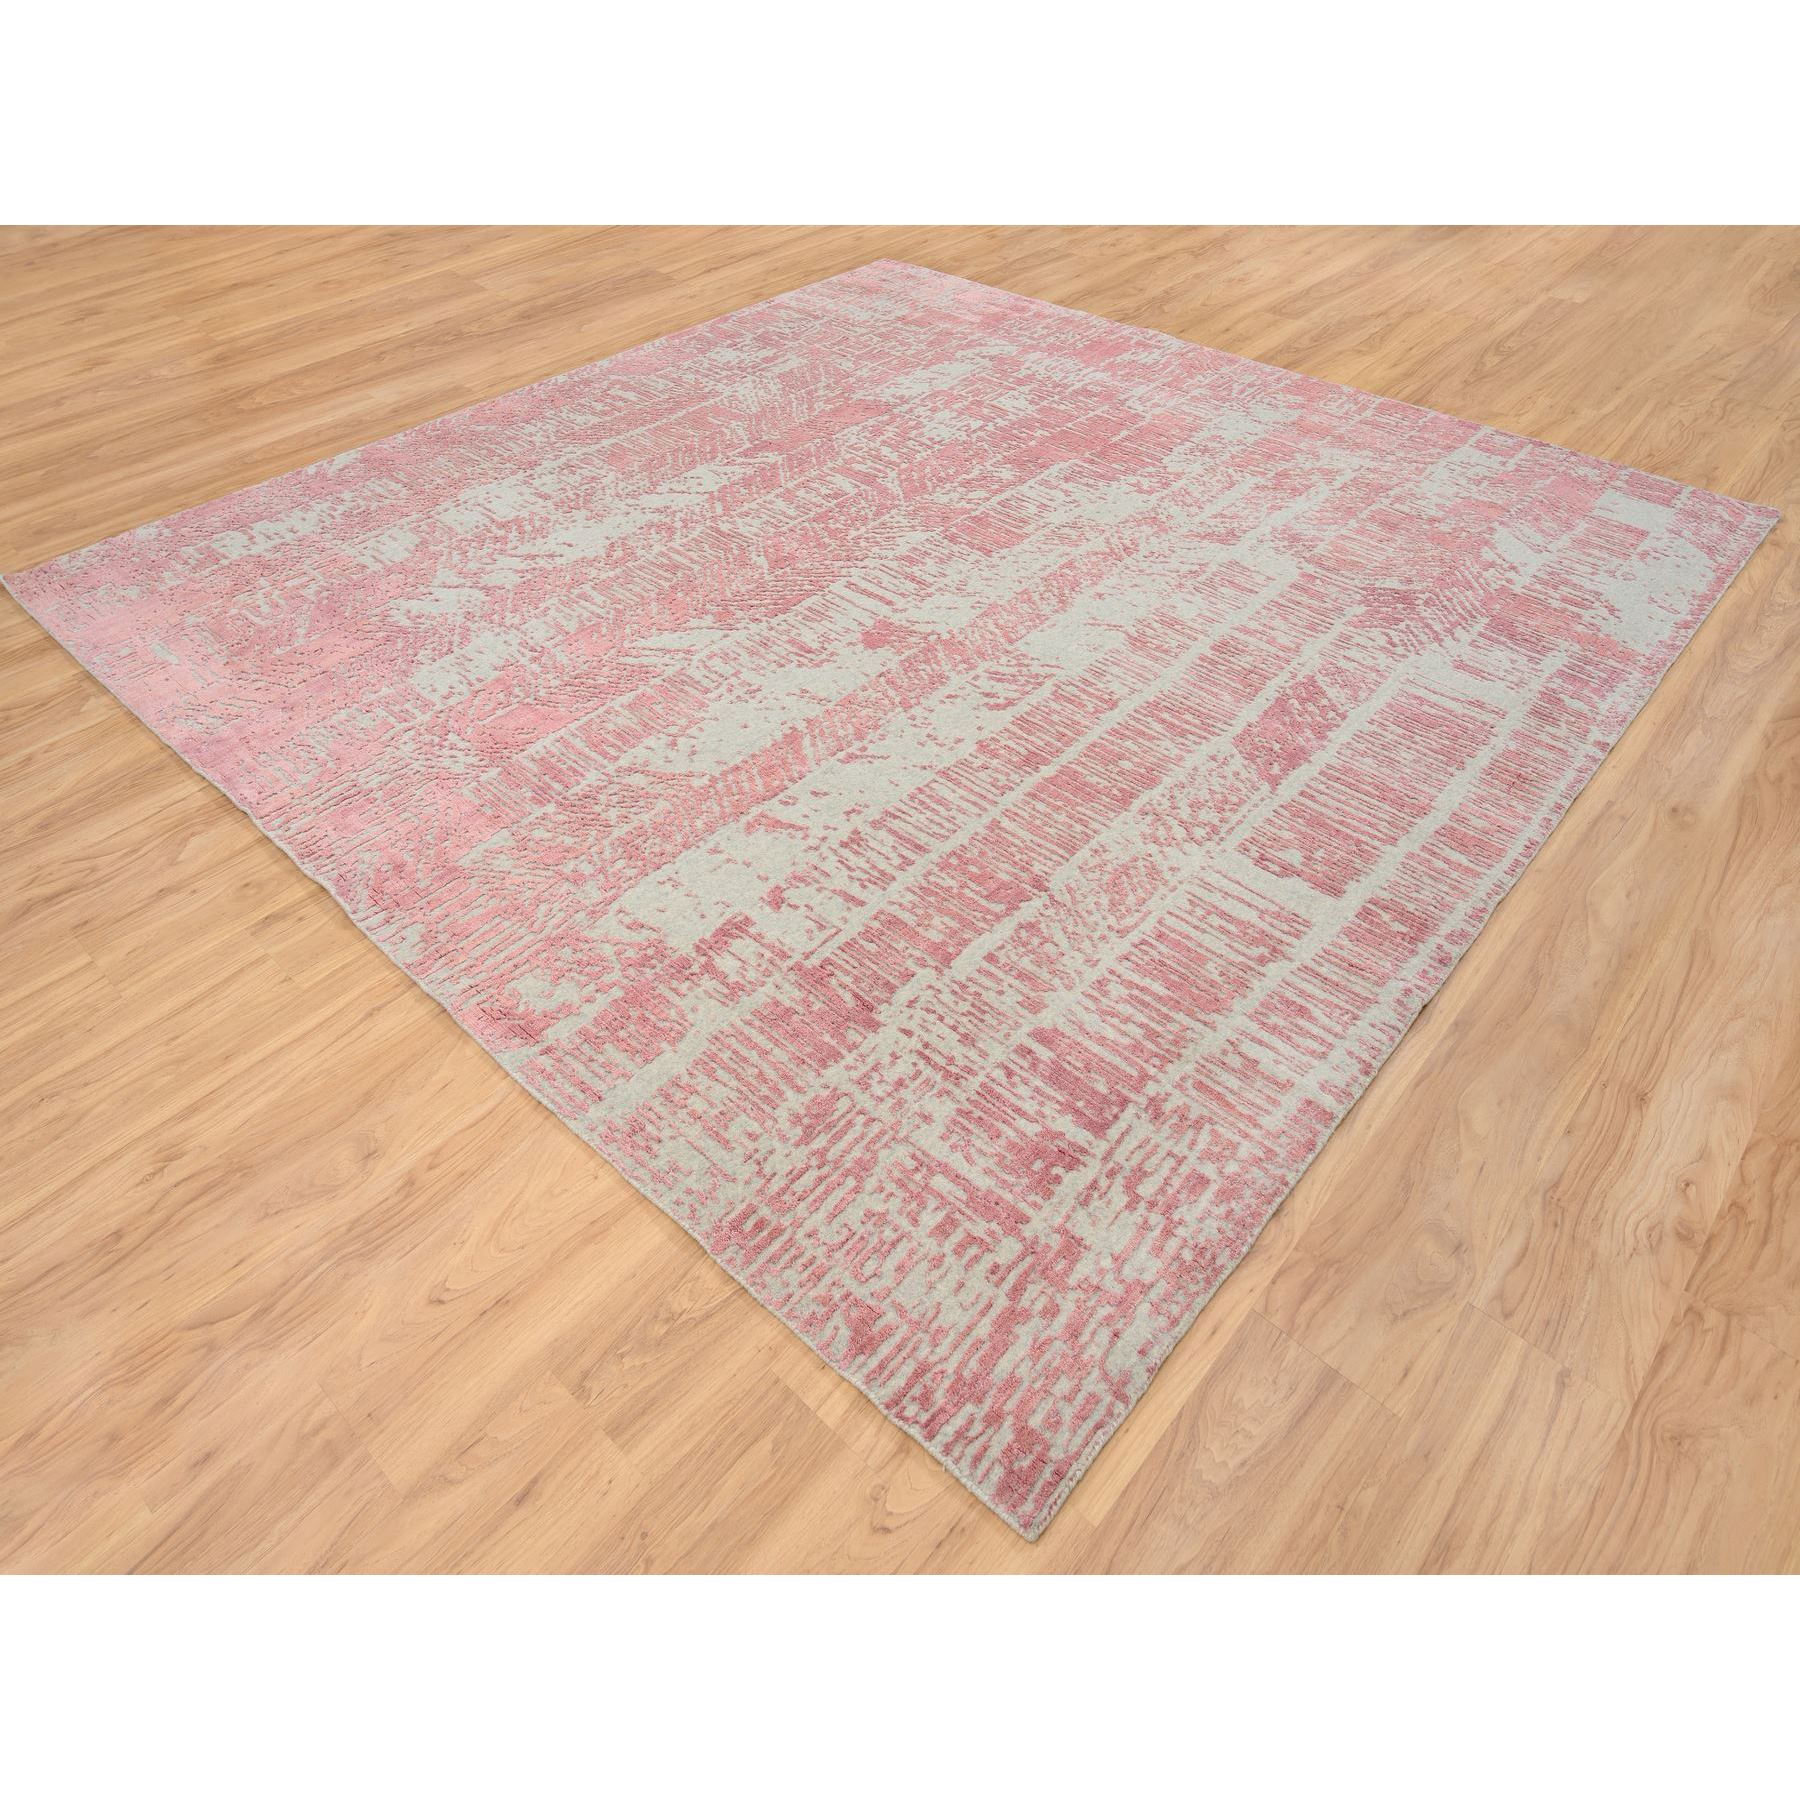 10'2"x10'2" Rose Pink, Wool and Art Silk Jacquard Hand Loomed, All Over Design, Square Oriental Rug 